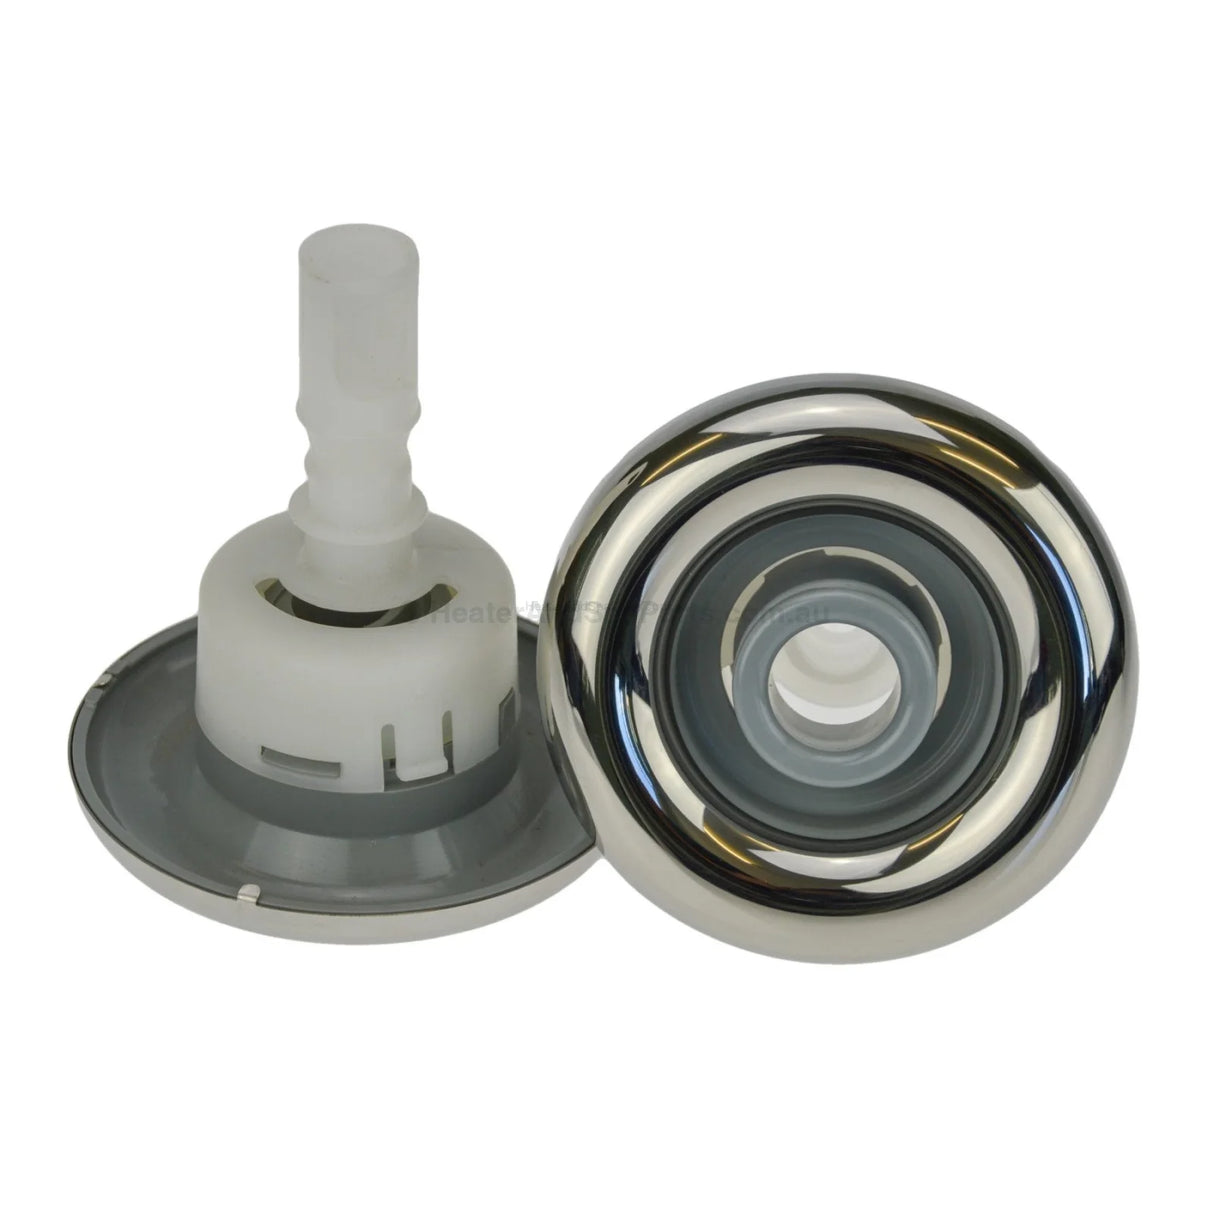 Pentair Luxury Cyclone Spa Jet - Stainless - Directional - Scallops - 90mm - Heater and Spa Parts